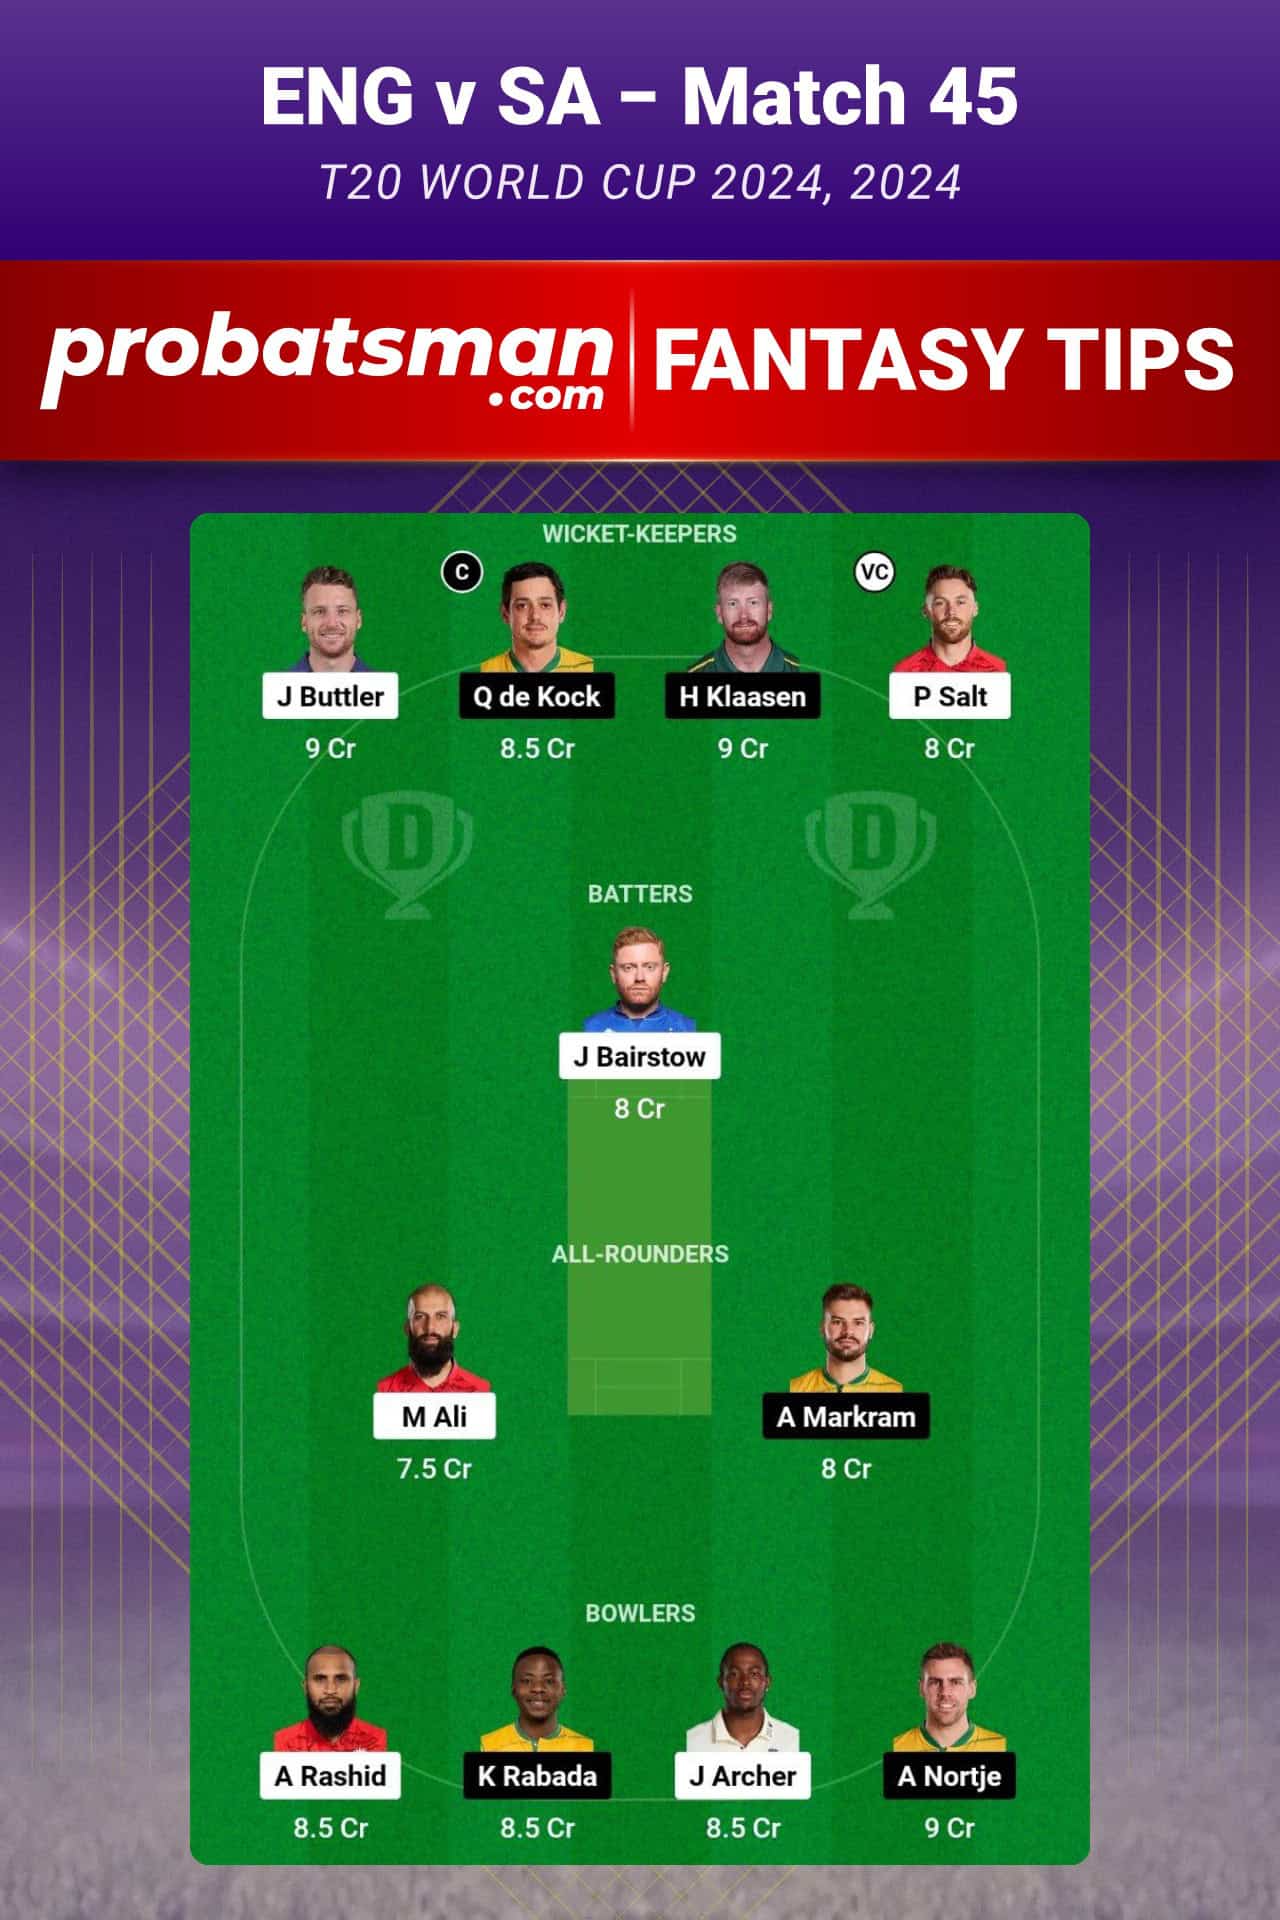 ENG vs SA Dream11 Prediction For Match 45 of T20 World Cup 2024